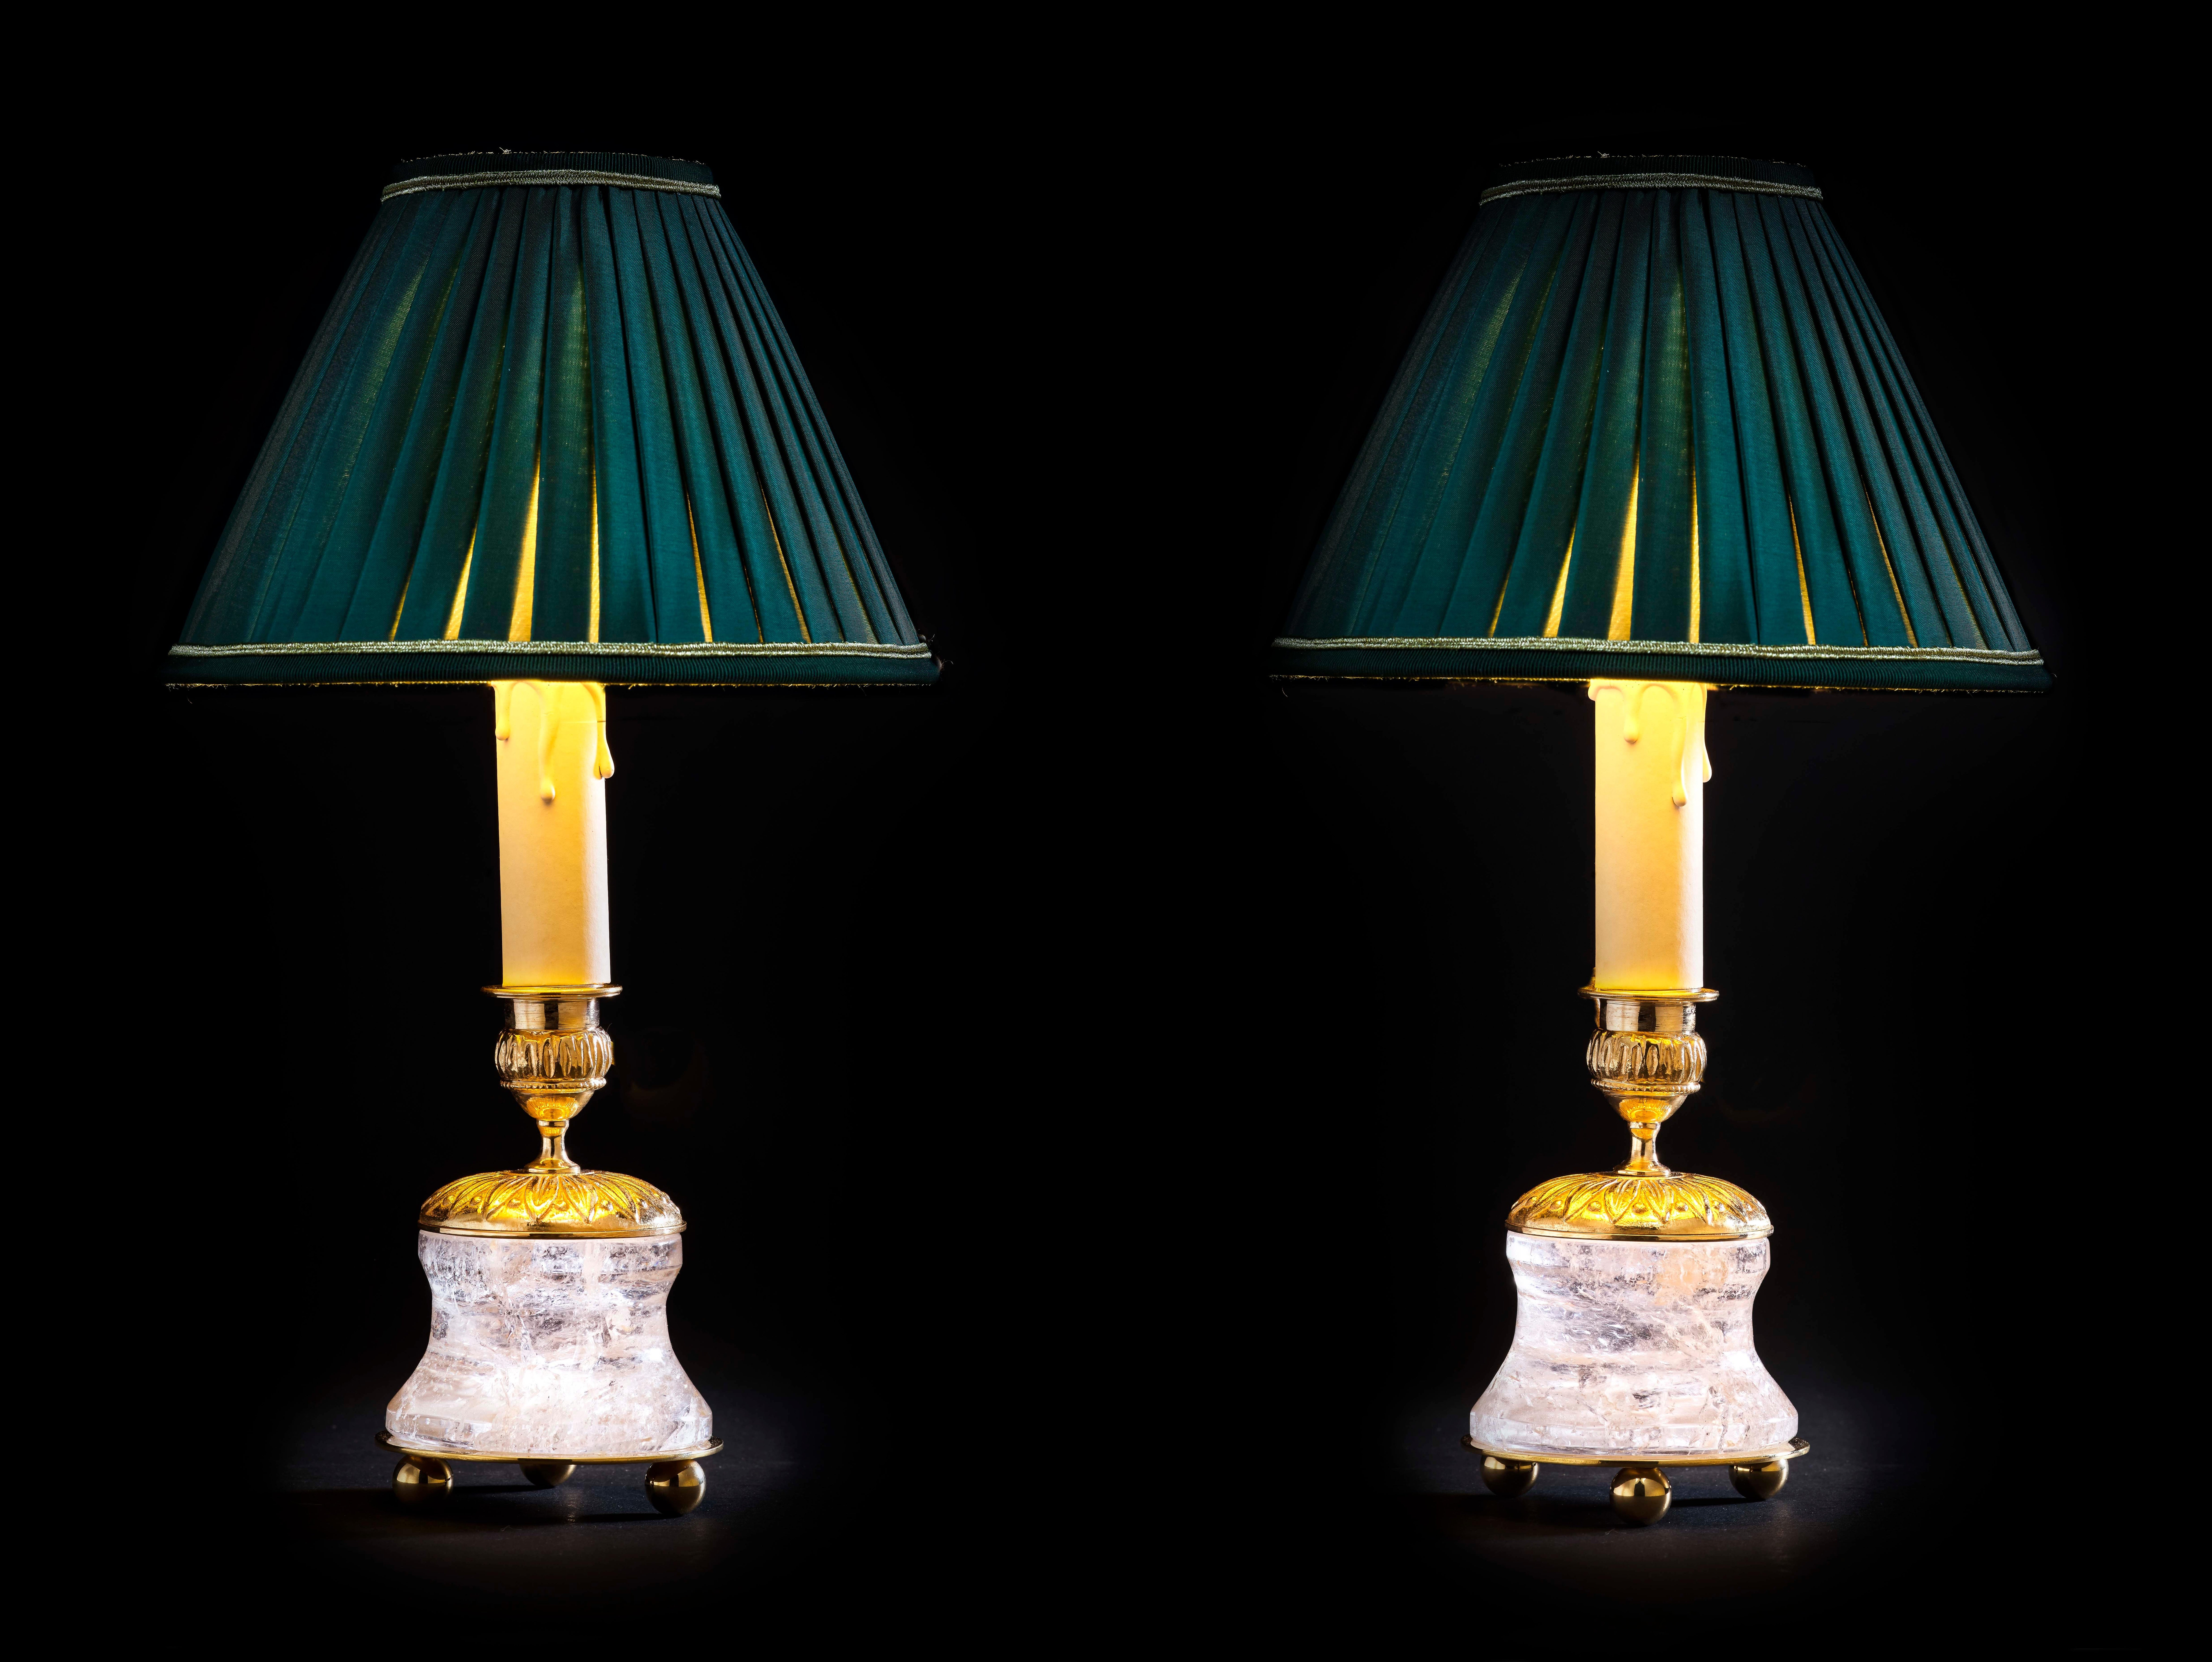 Rock crystal French First Empire style 24-karat ormolu gilding bronze green lampshades made by Alexandre Vossion.
This model can be also used as candlesticks to make your dining table so chic...
Others colors for the lampshades are also available